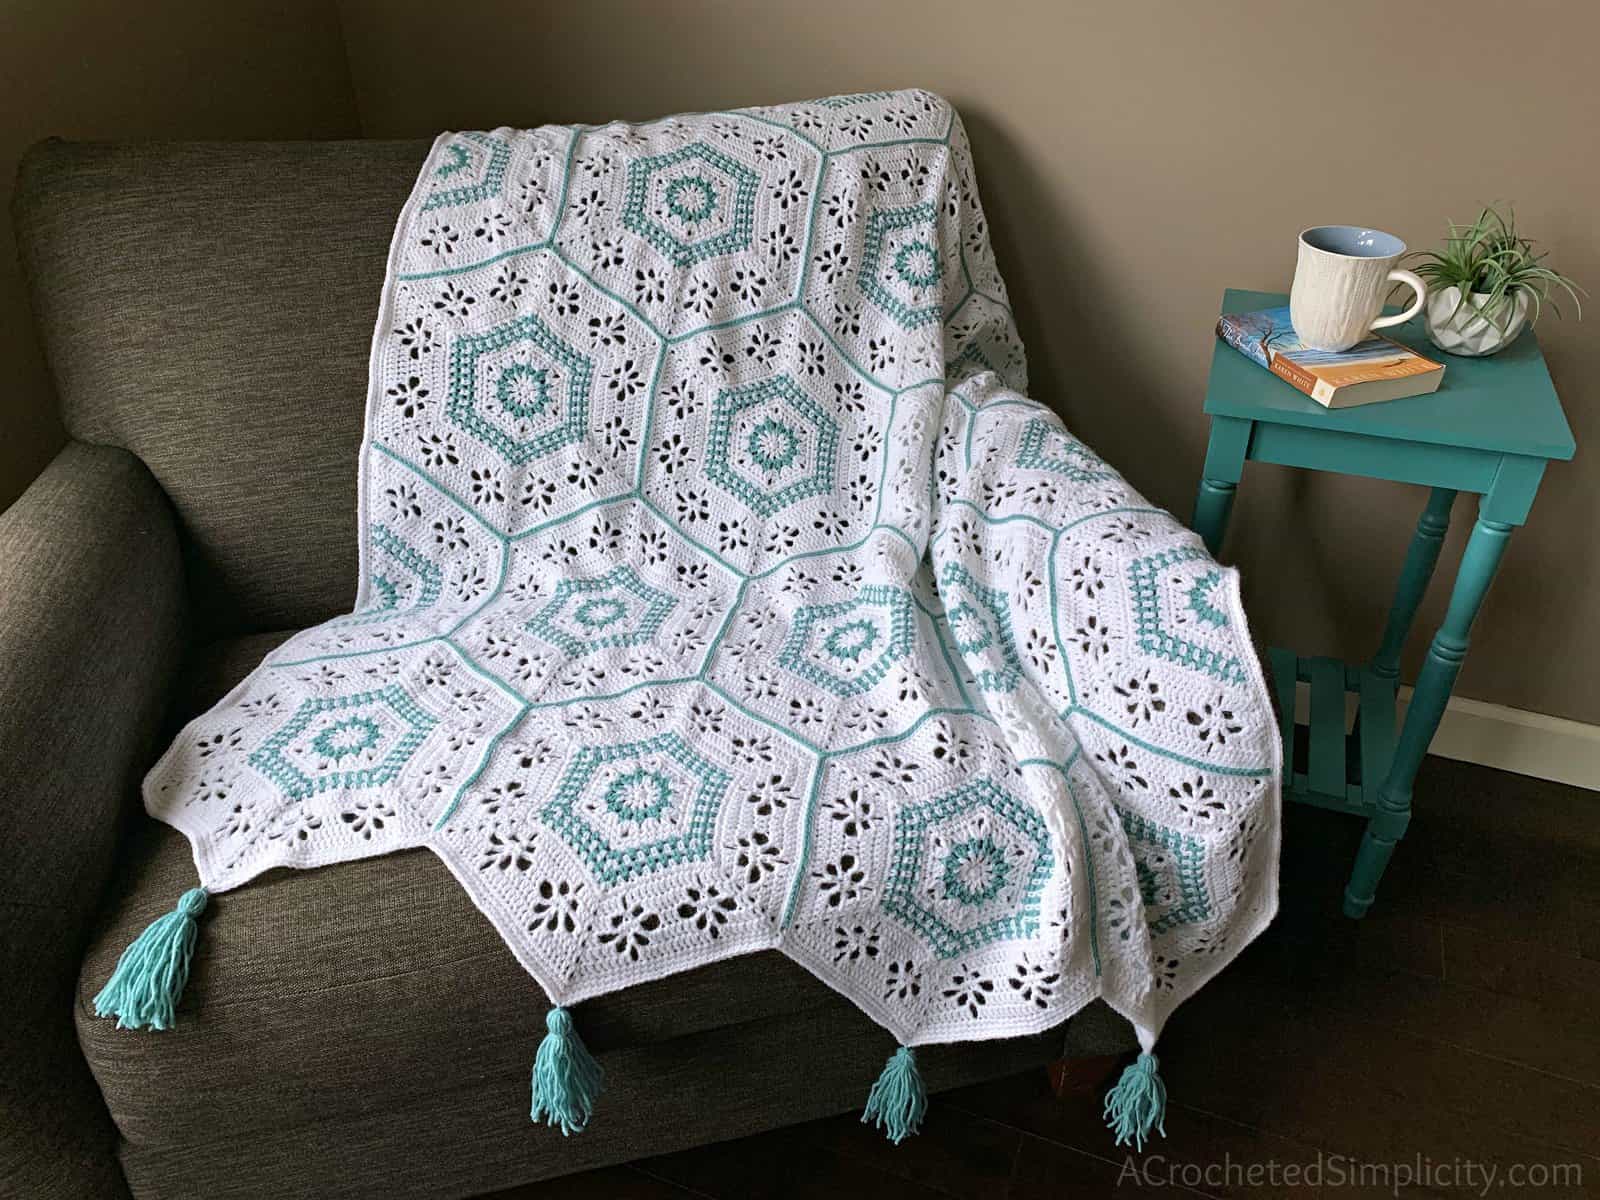 Free Crochet Hexagon Afghan Pattern- Succulent Spring Hexagon Afghan by A Crocheted Simplicity #freecrochetpattern #crochethexagonsquare #crochethexagonafghan #crochethexagonblanket #crochetafghansquare #12incheafghansquare #freecrochetblanketsquare #crochettextures #crochetafghan #crochetblanket #freehexagonafghanpattern